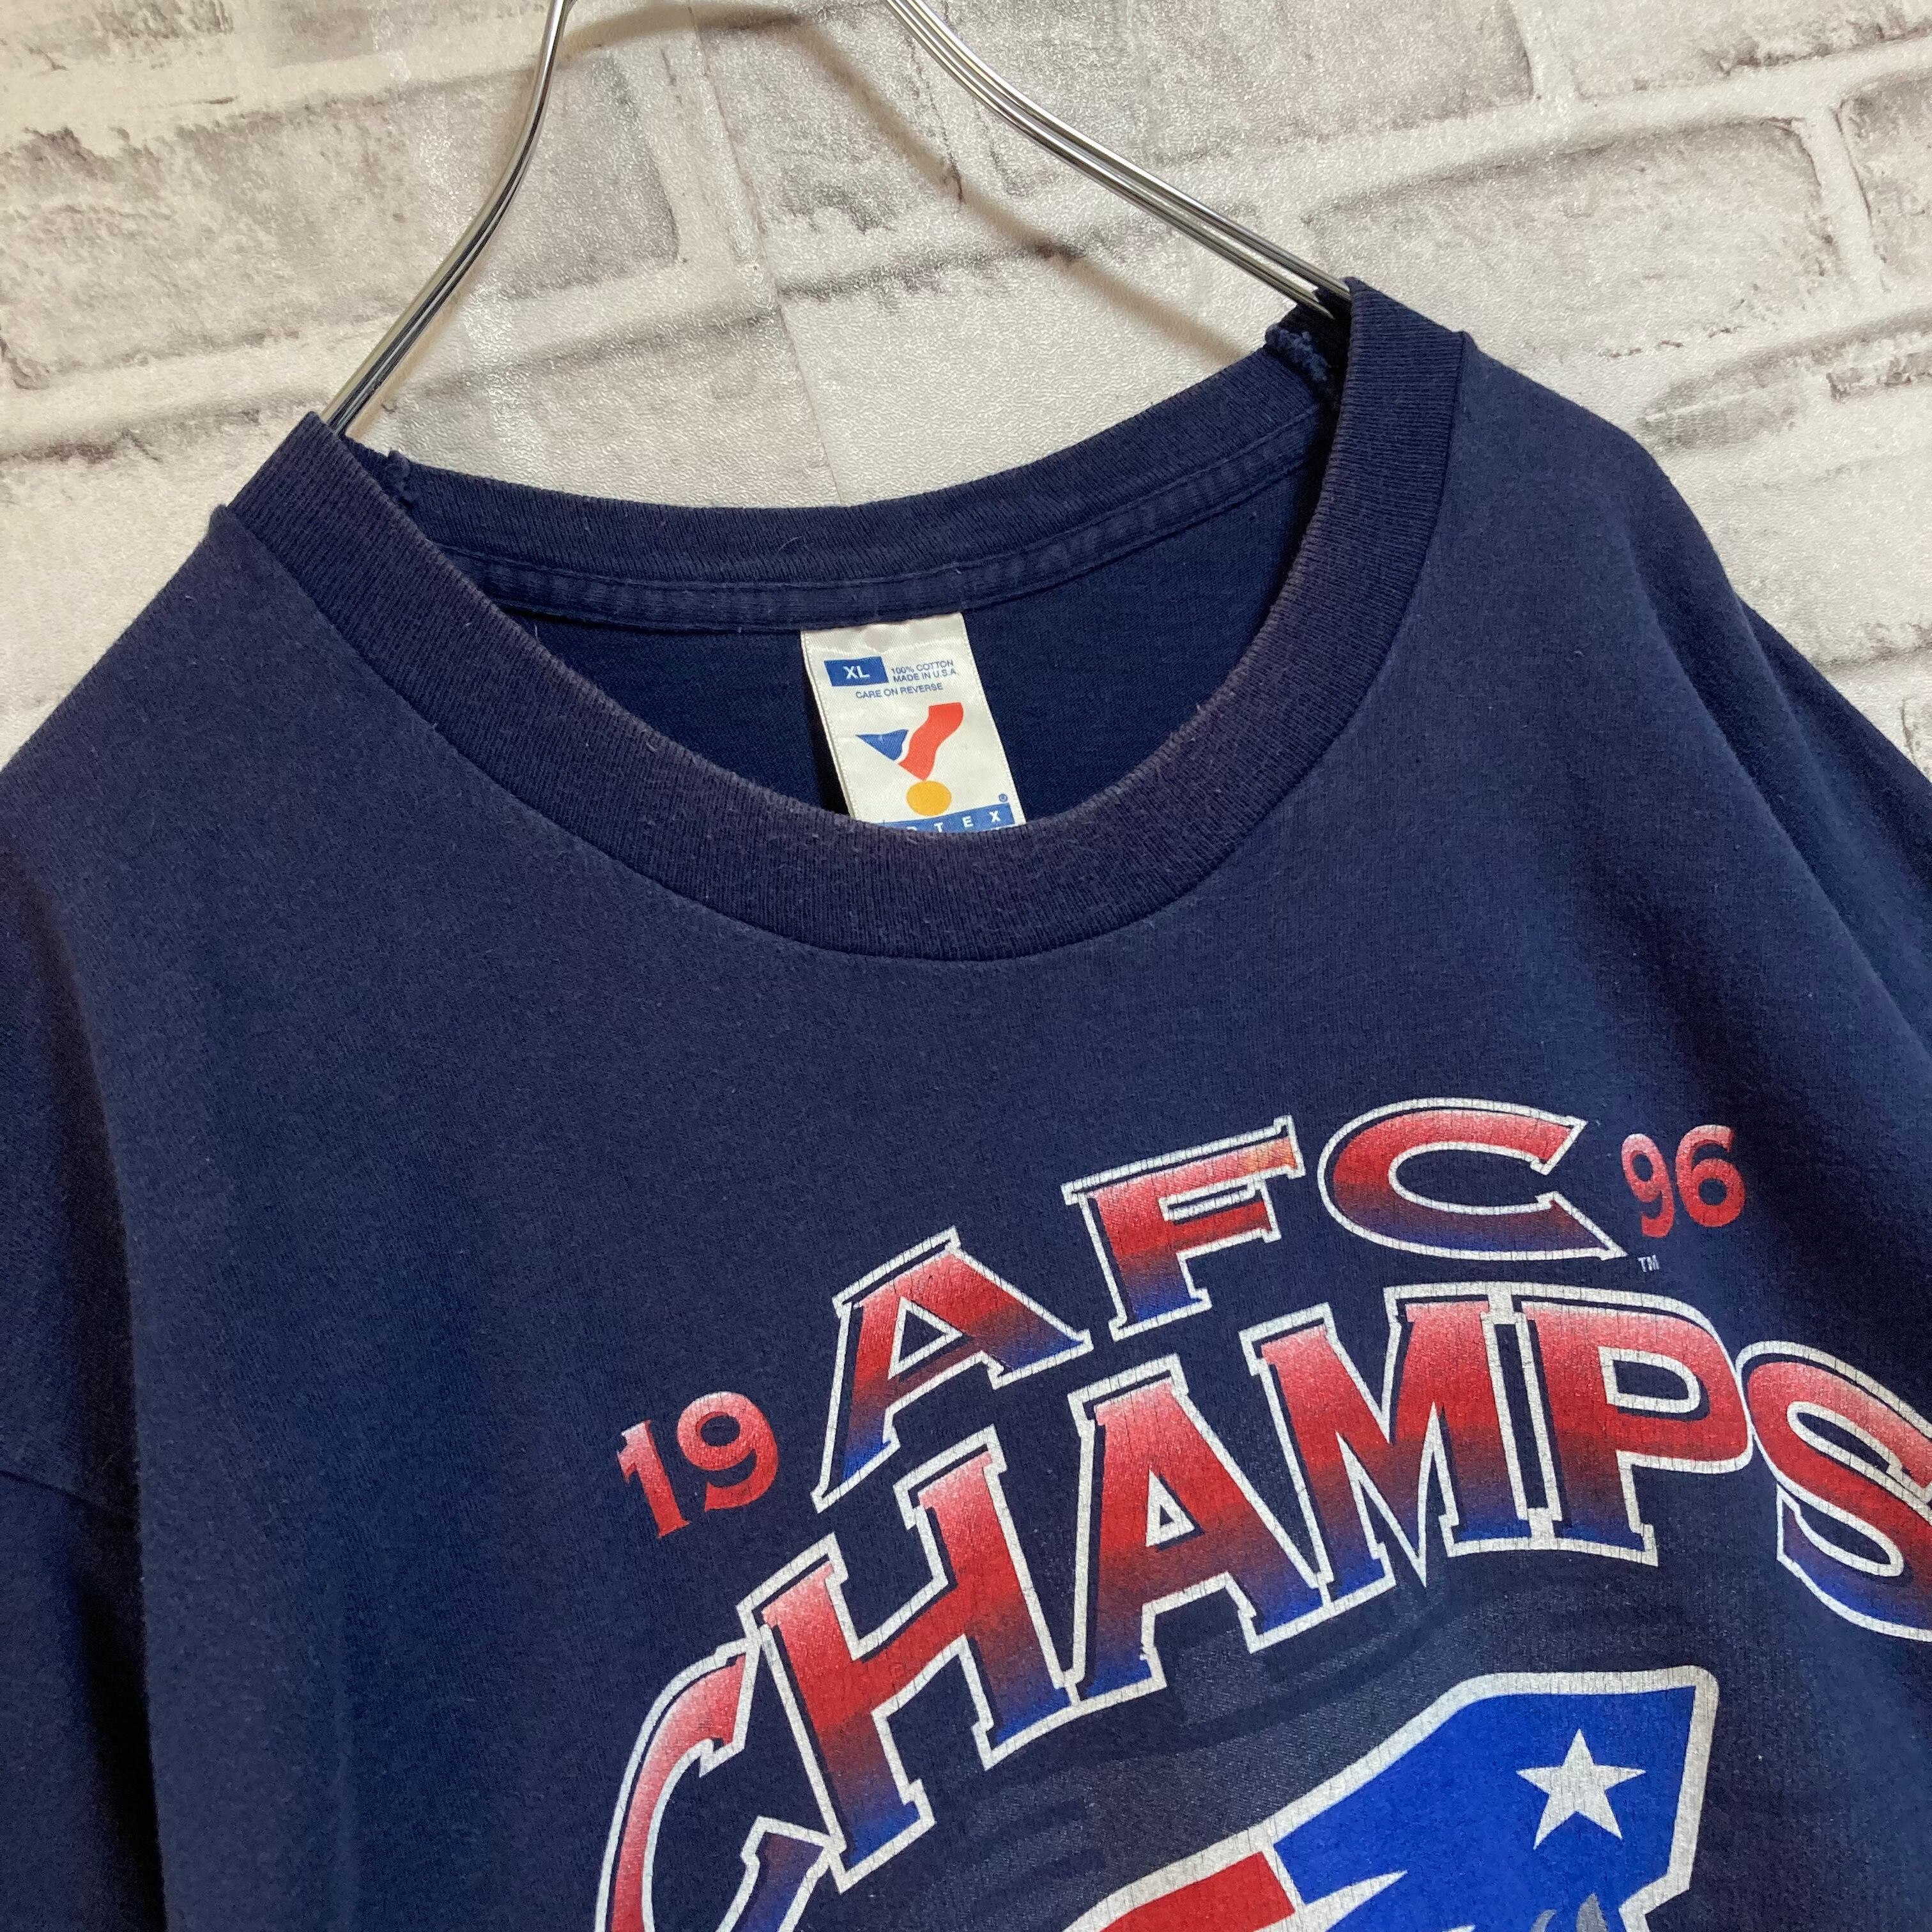 【ARTEX SPORTSWEAR】S/S Tee XL Made in USA “ NEW ENGLAND PATRIOTS” 90s NFL  チームロゴ Tシャツ シングルステッチ アメリカ USA 古着